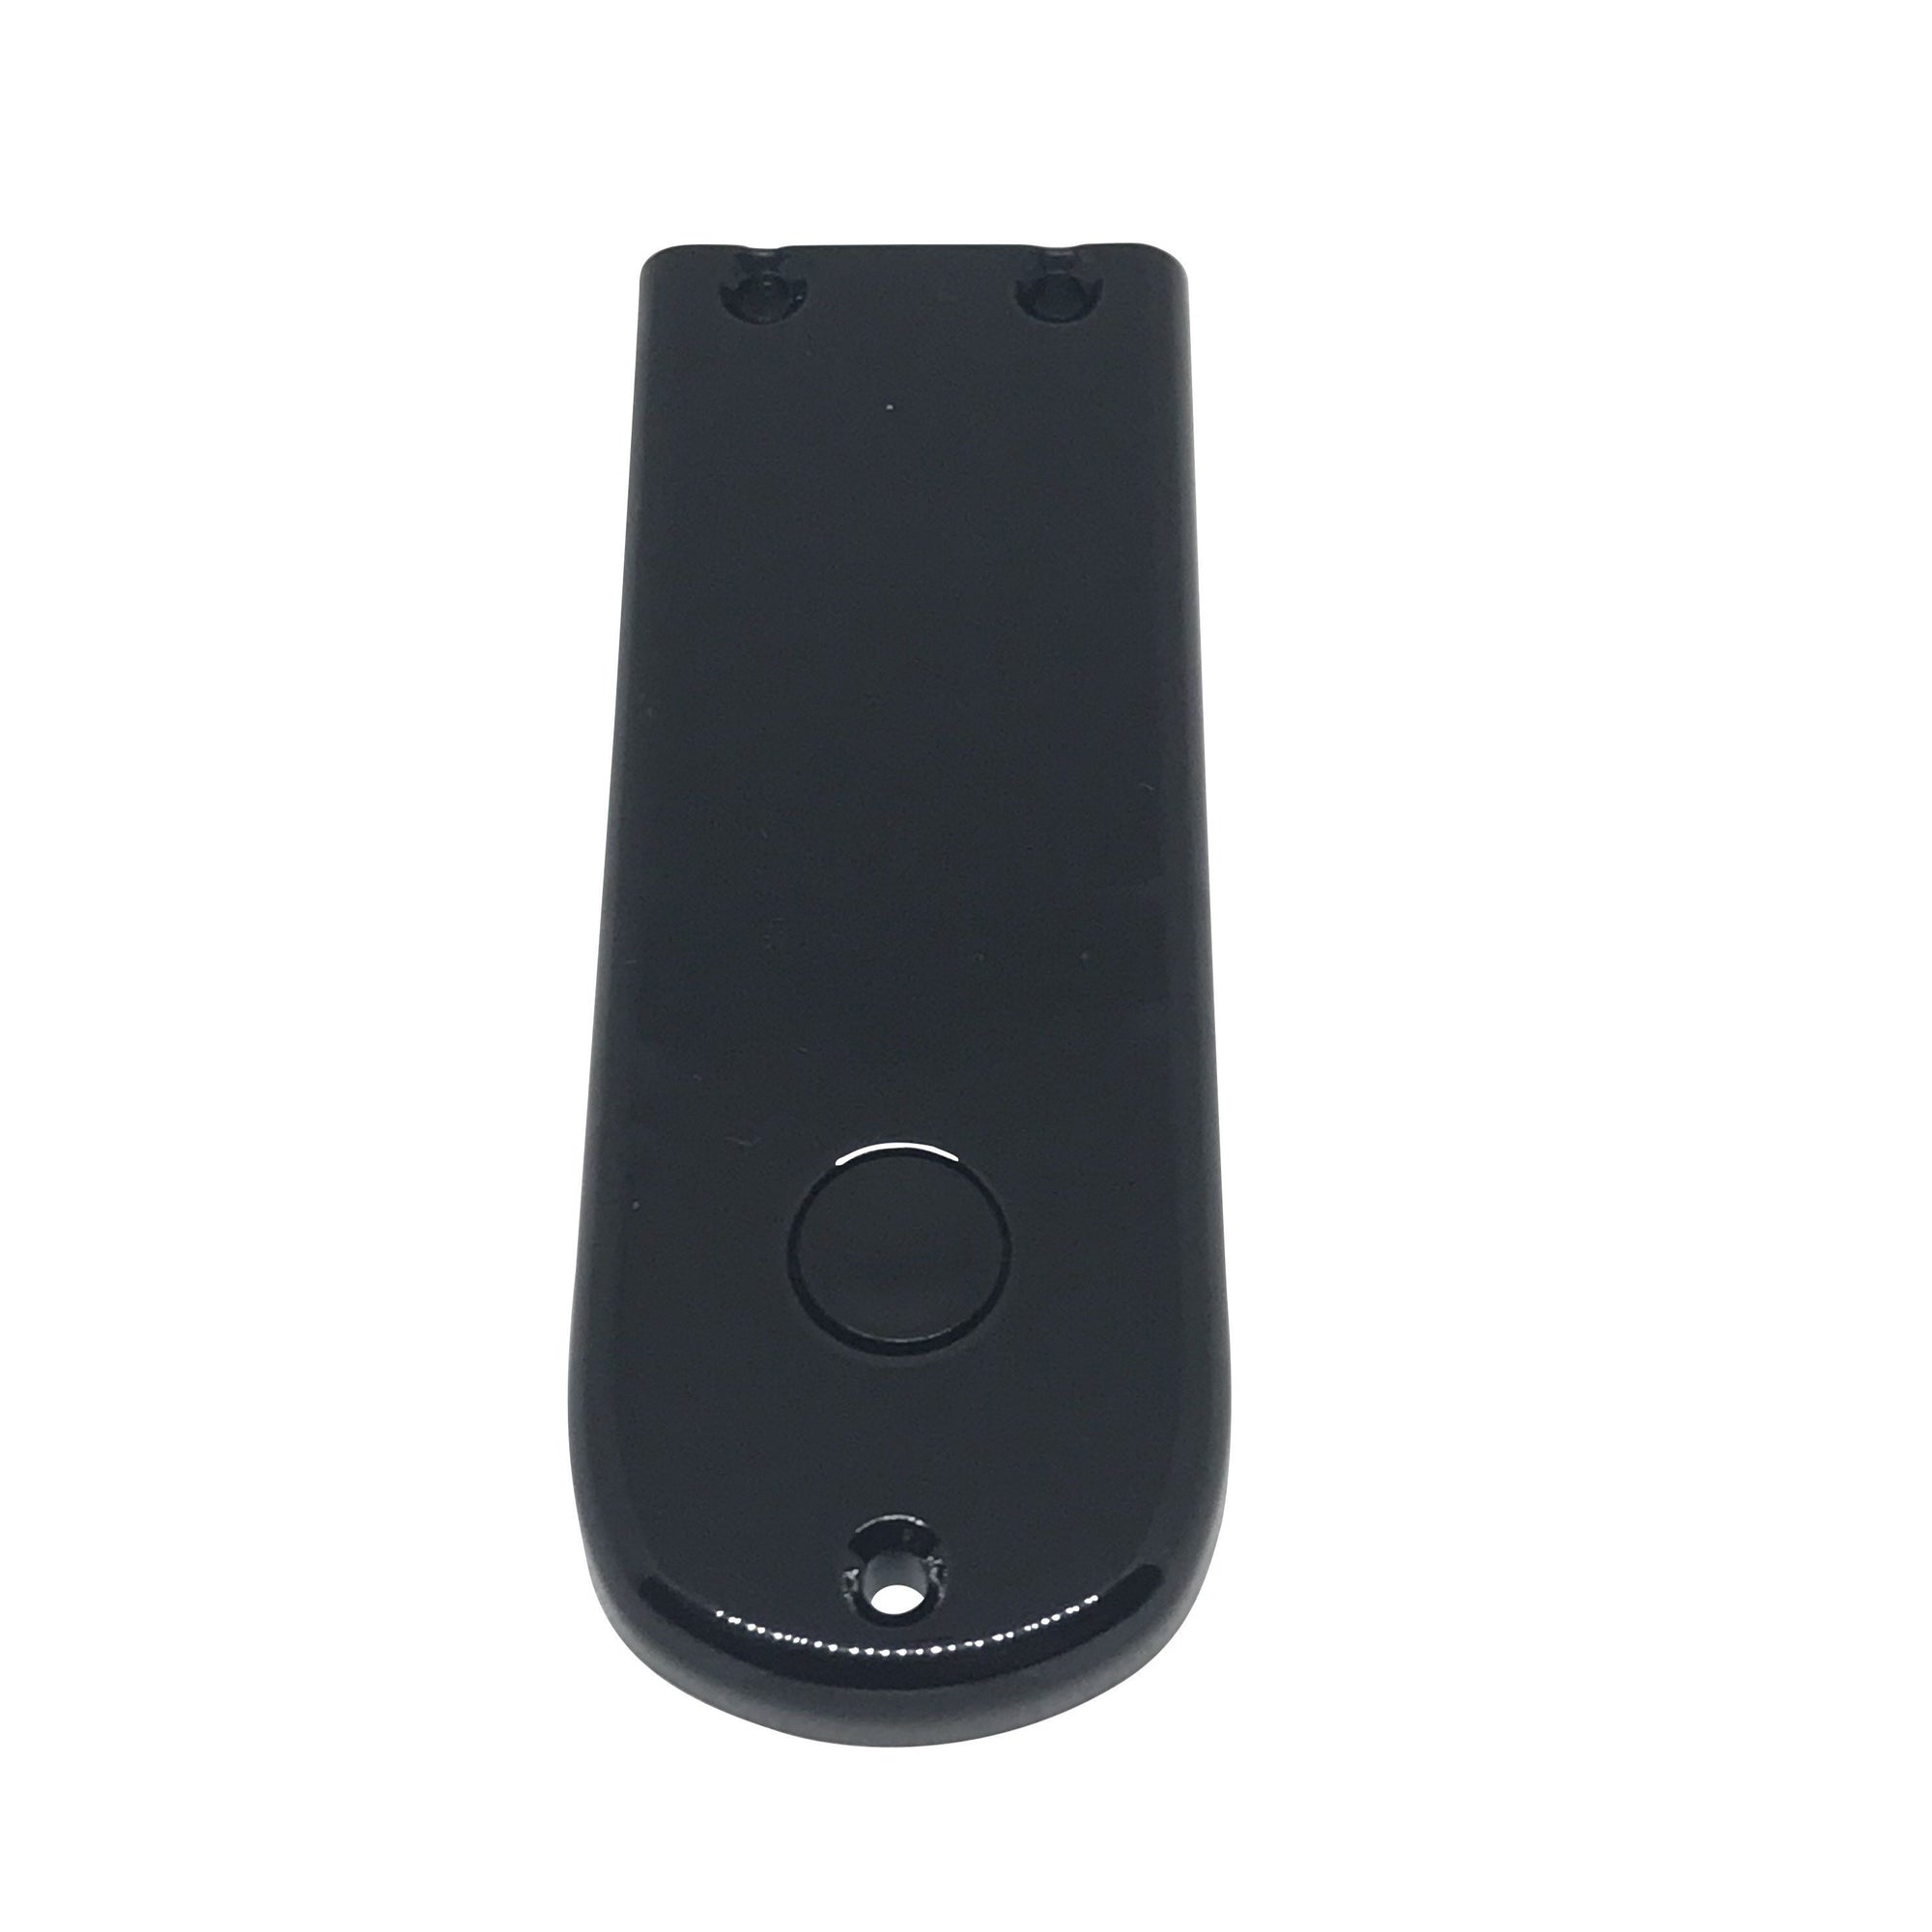 Replacement Display Cover for Segway Max 2.0 Kick Scooters